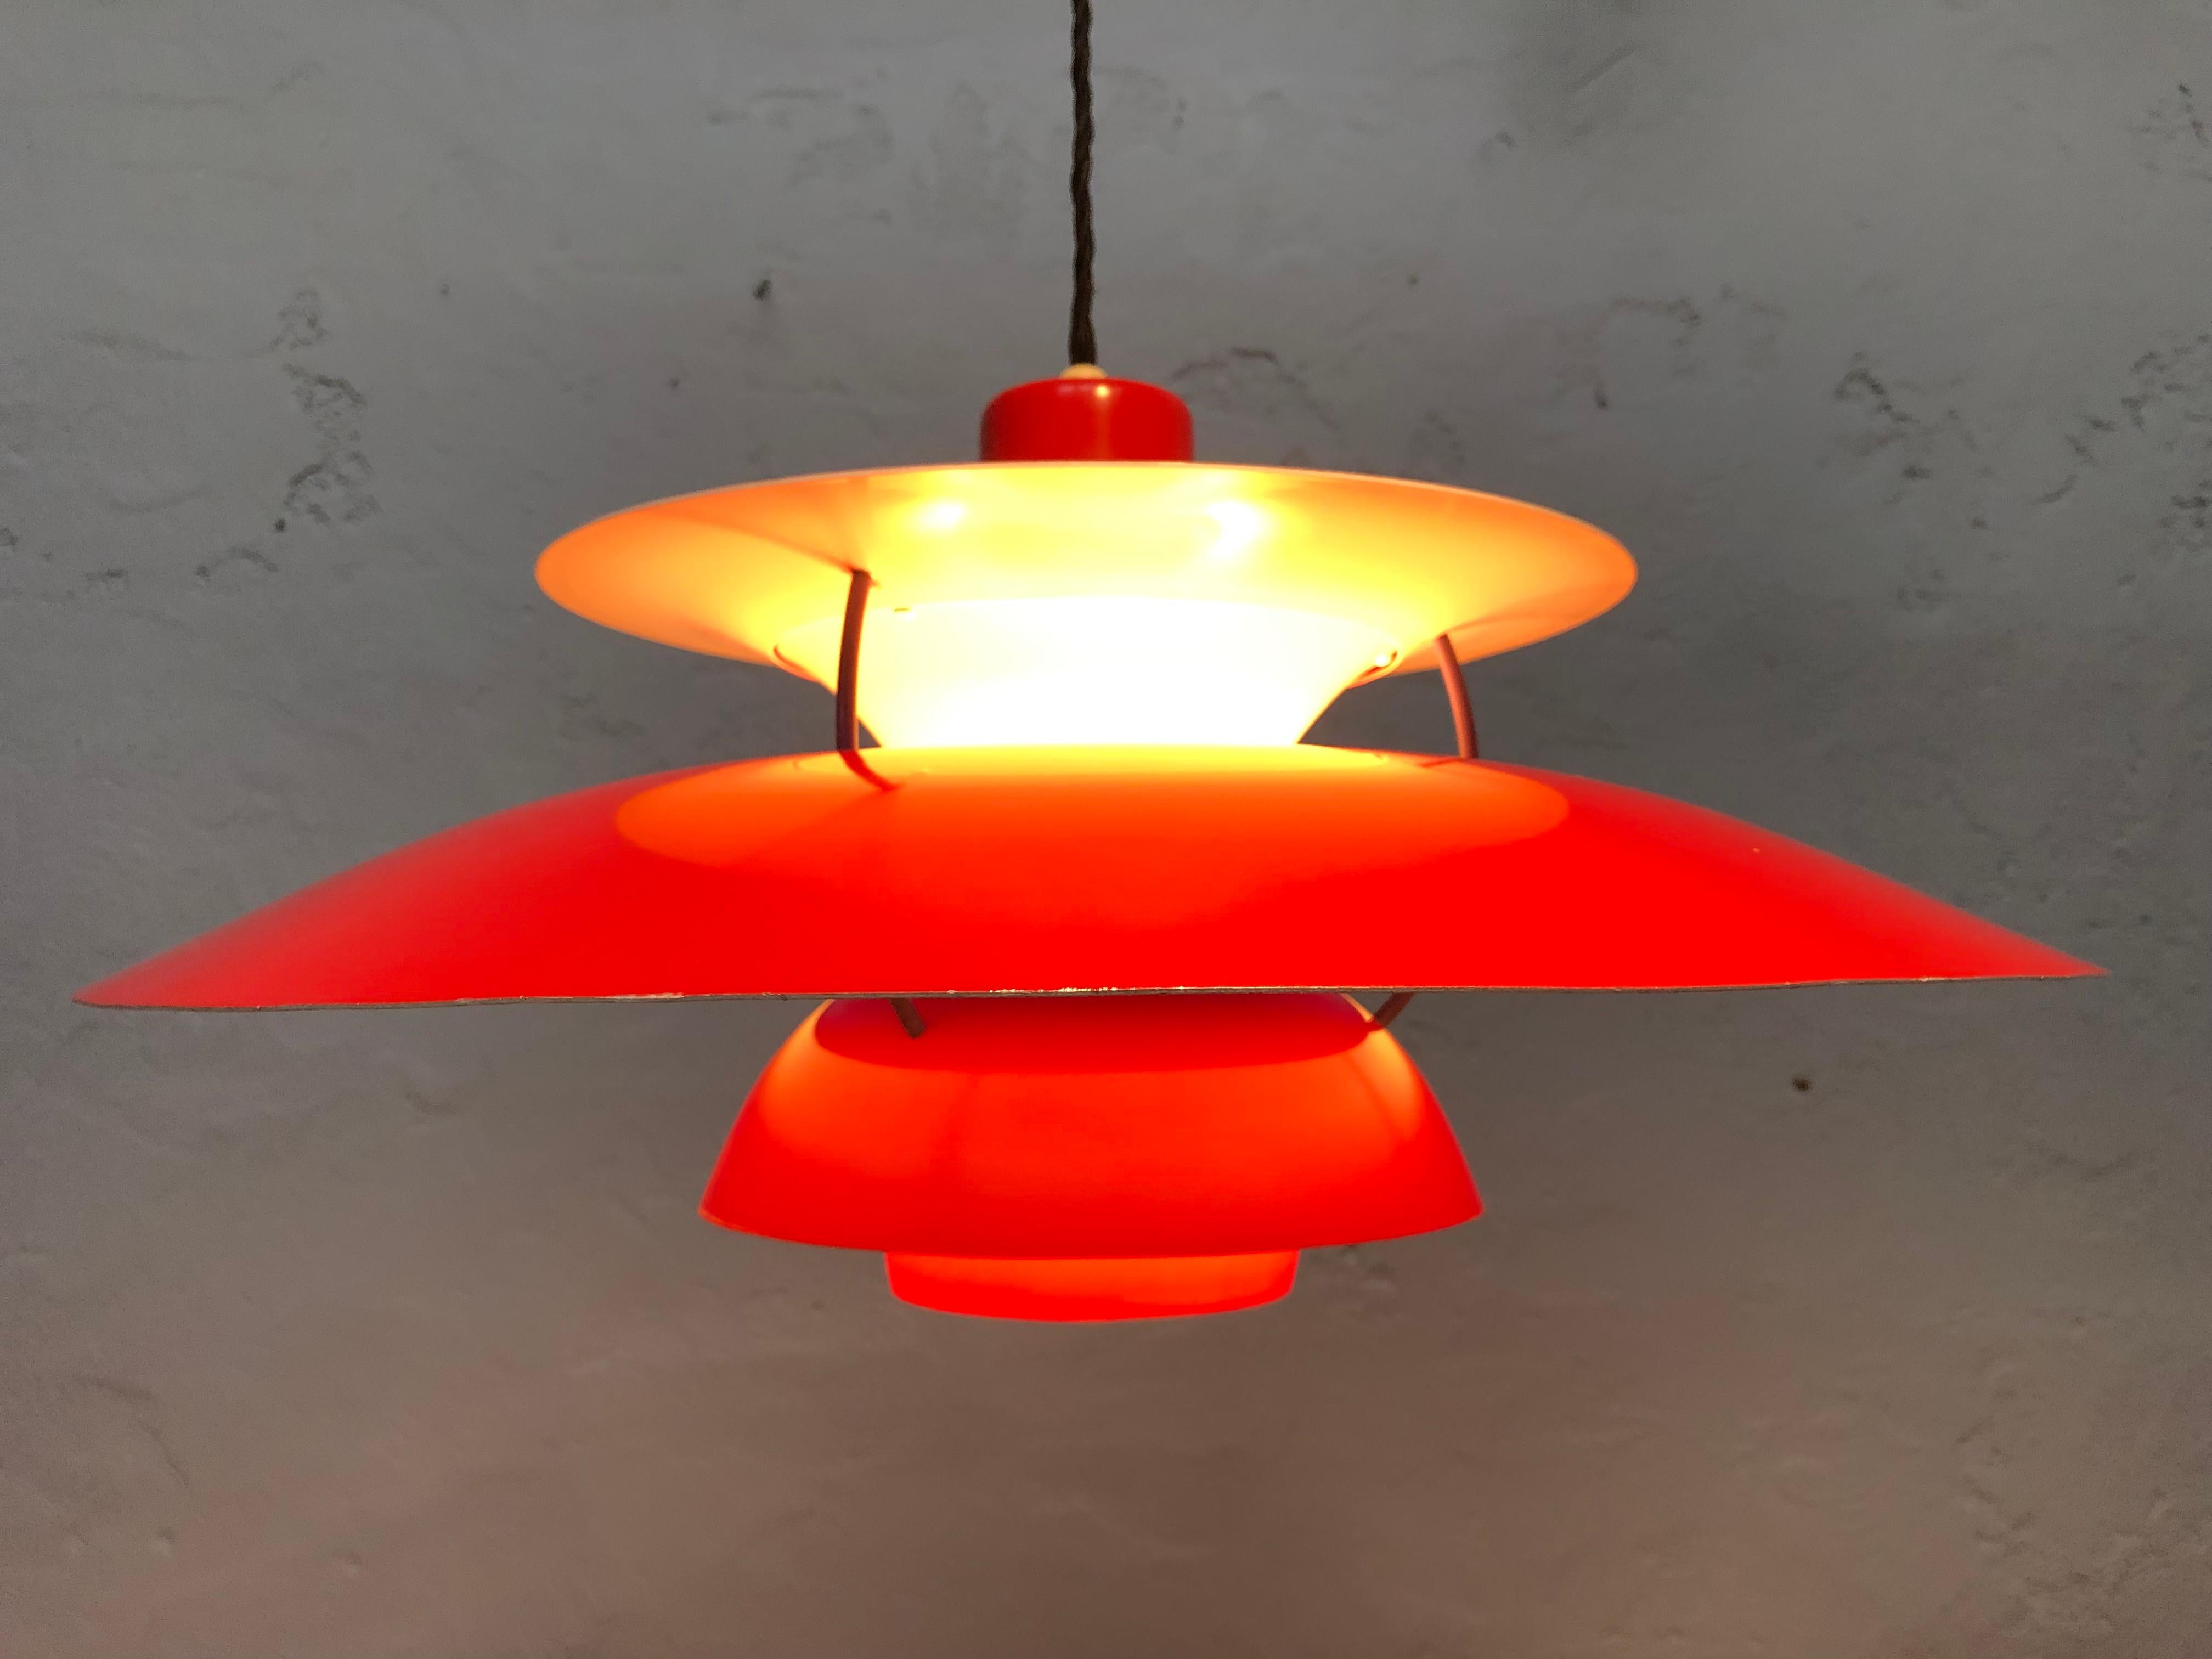 Mid-Century Modern Iconic Rare 1st Edition Poul Henningsen PH 5 Chandelier Pendant Lamp from 1959 For Sale